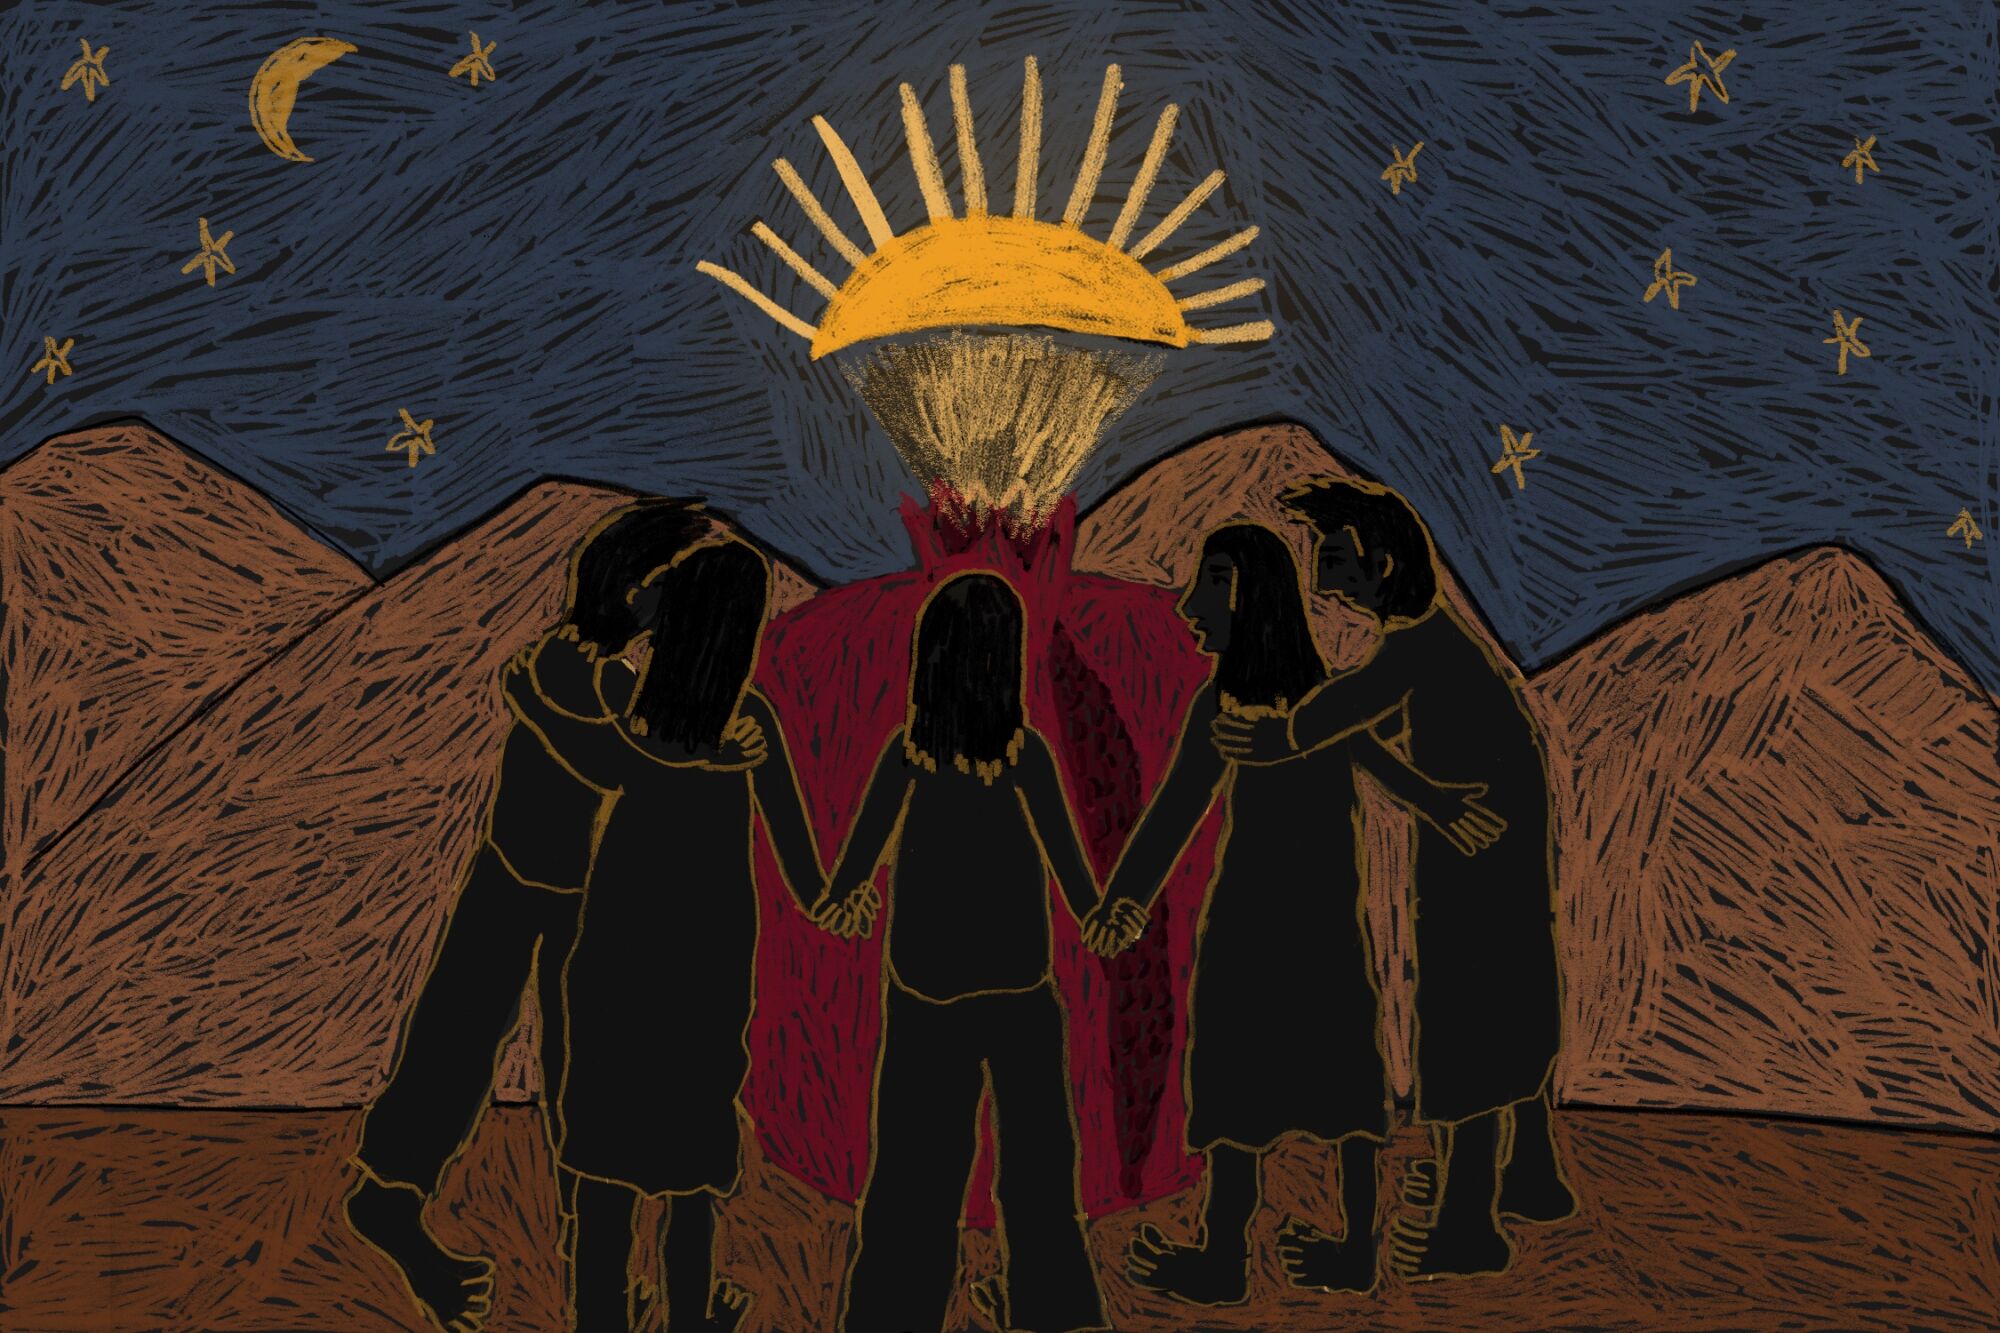 A group of people stand hand-in-hand around a pomegranate sun bursting with seeds under a starry sky